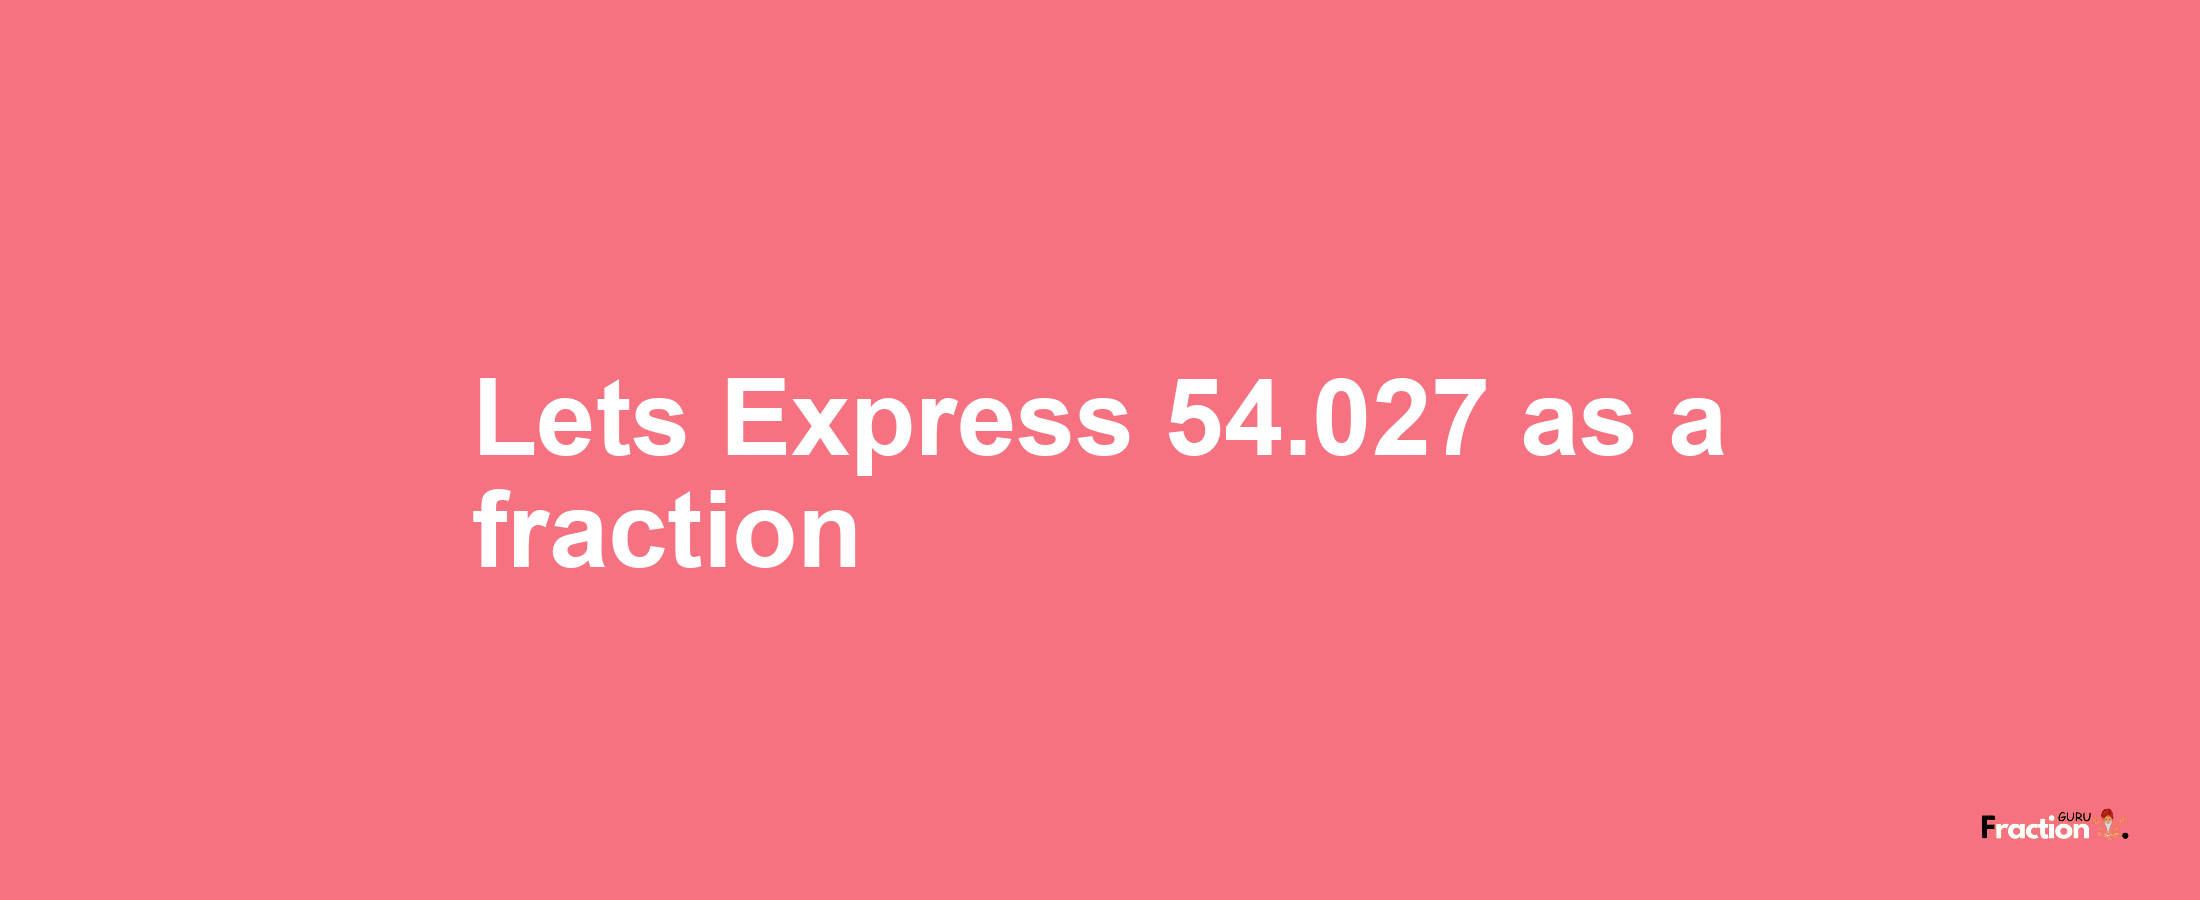 Lets Express 54.027 as afraction